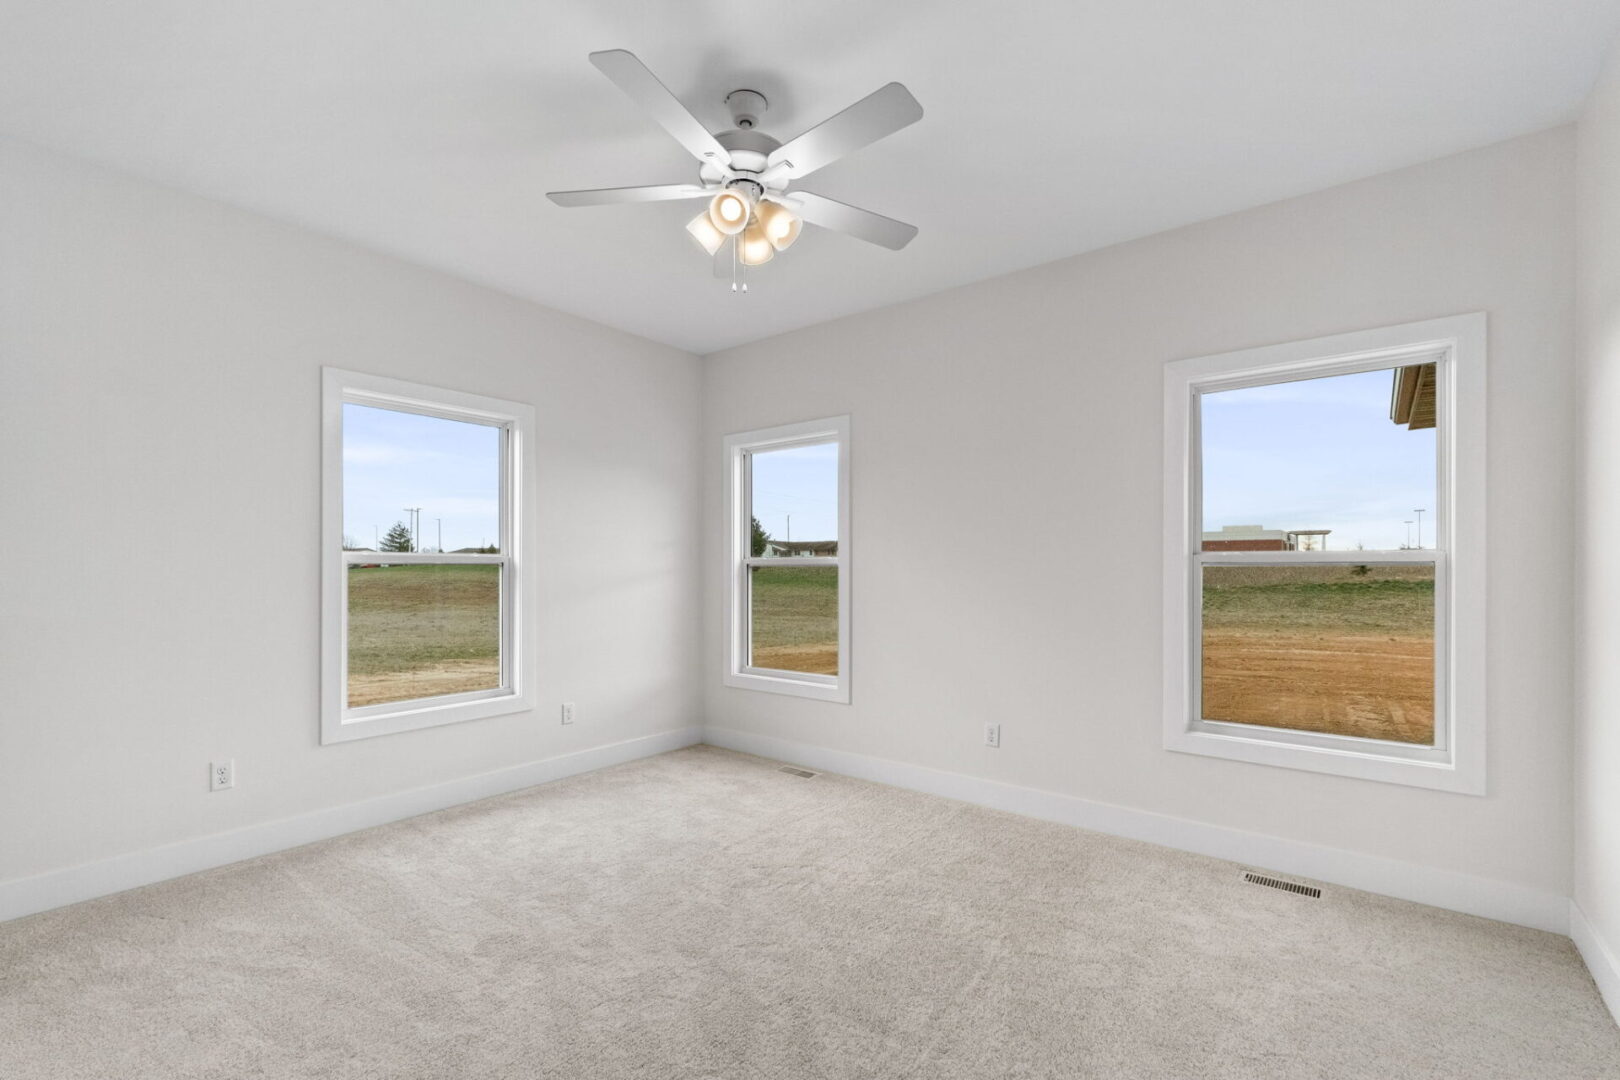 An empty room with a light fan and three windows